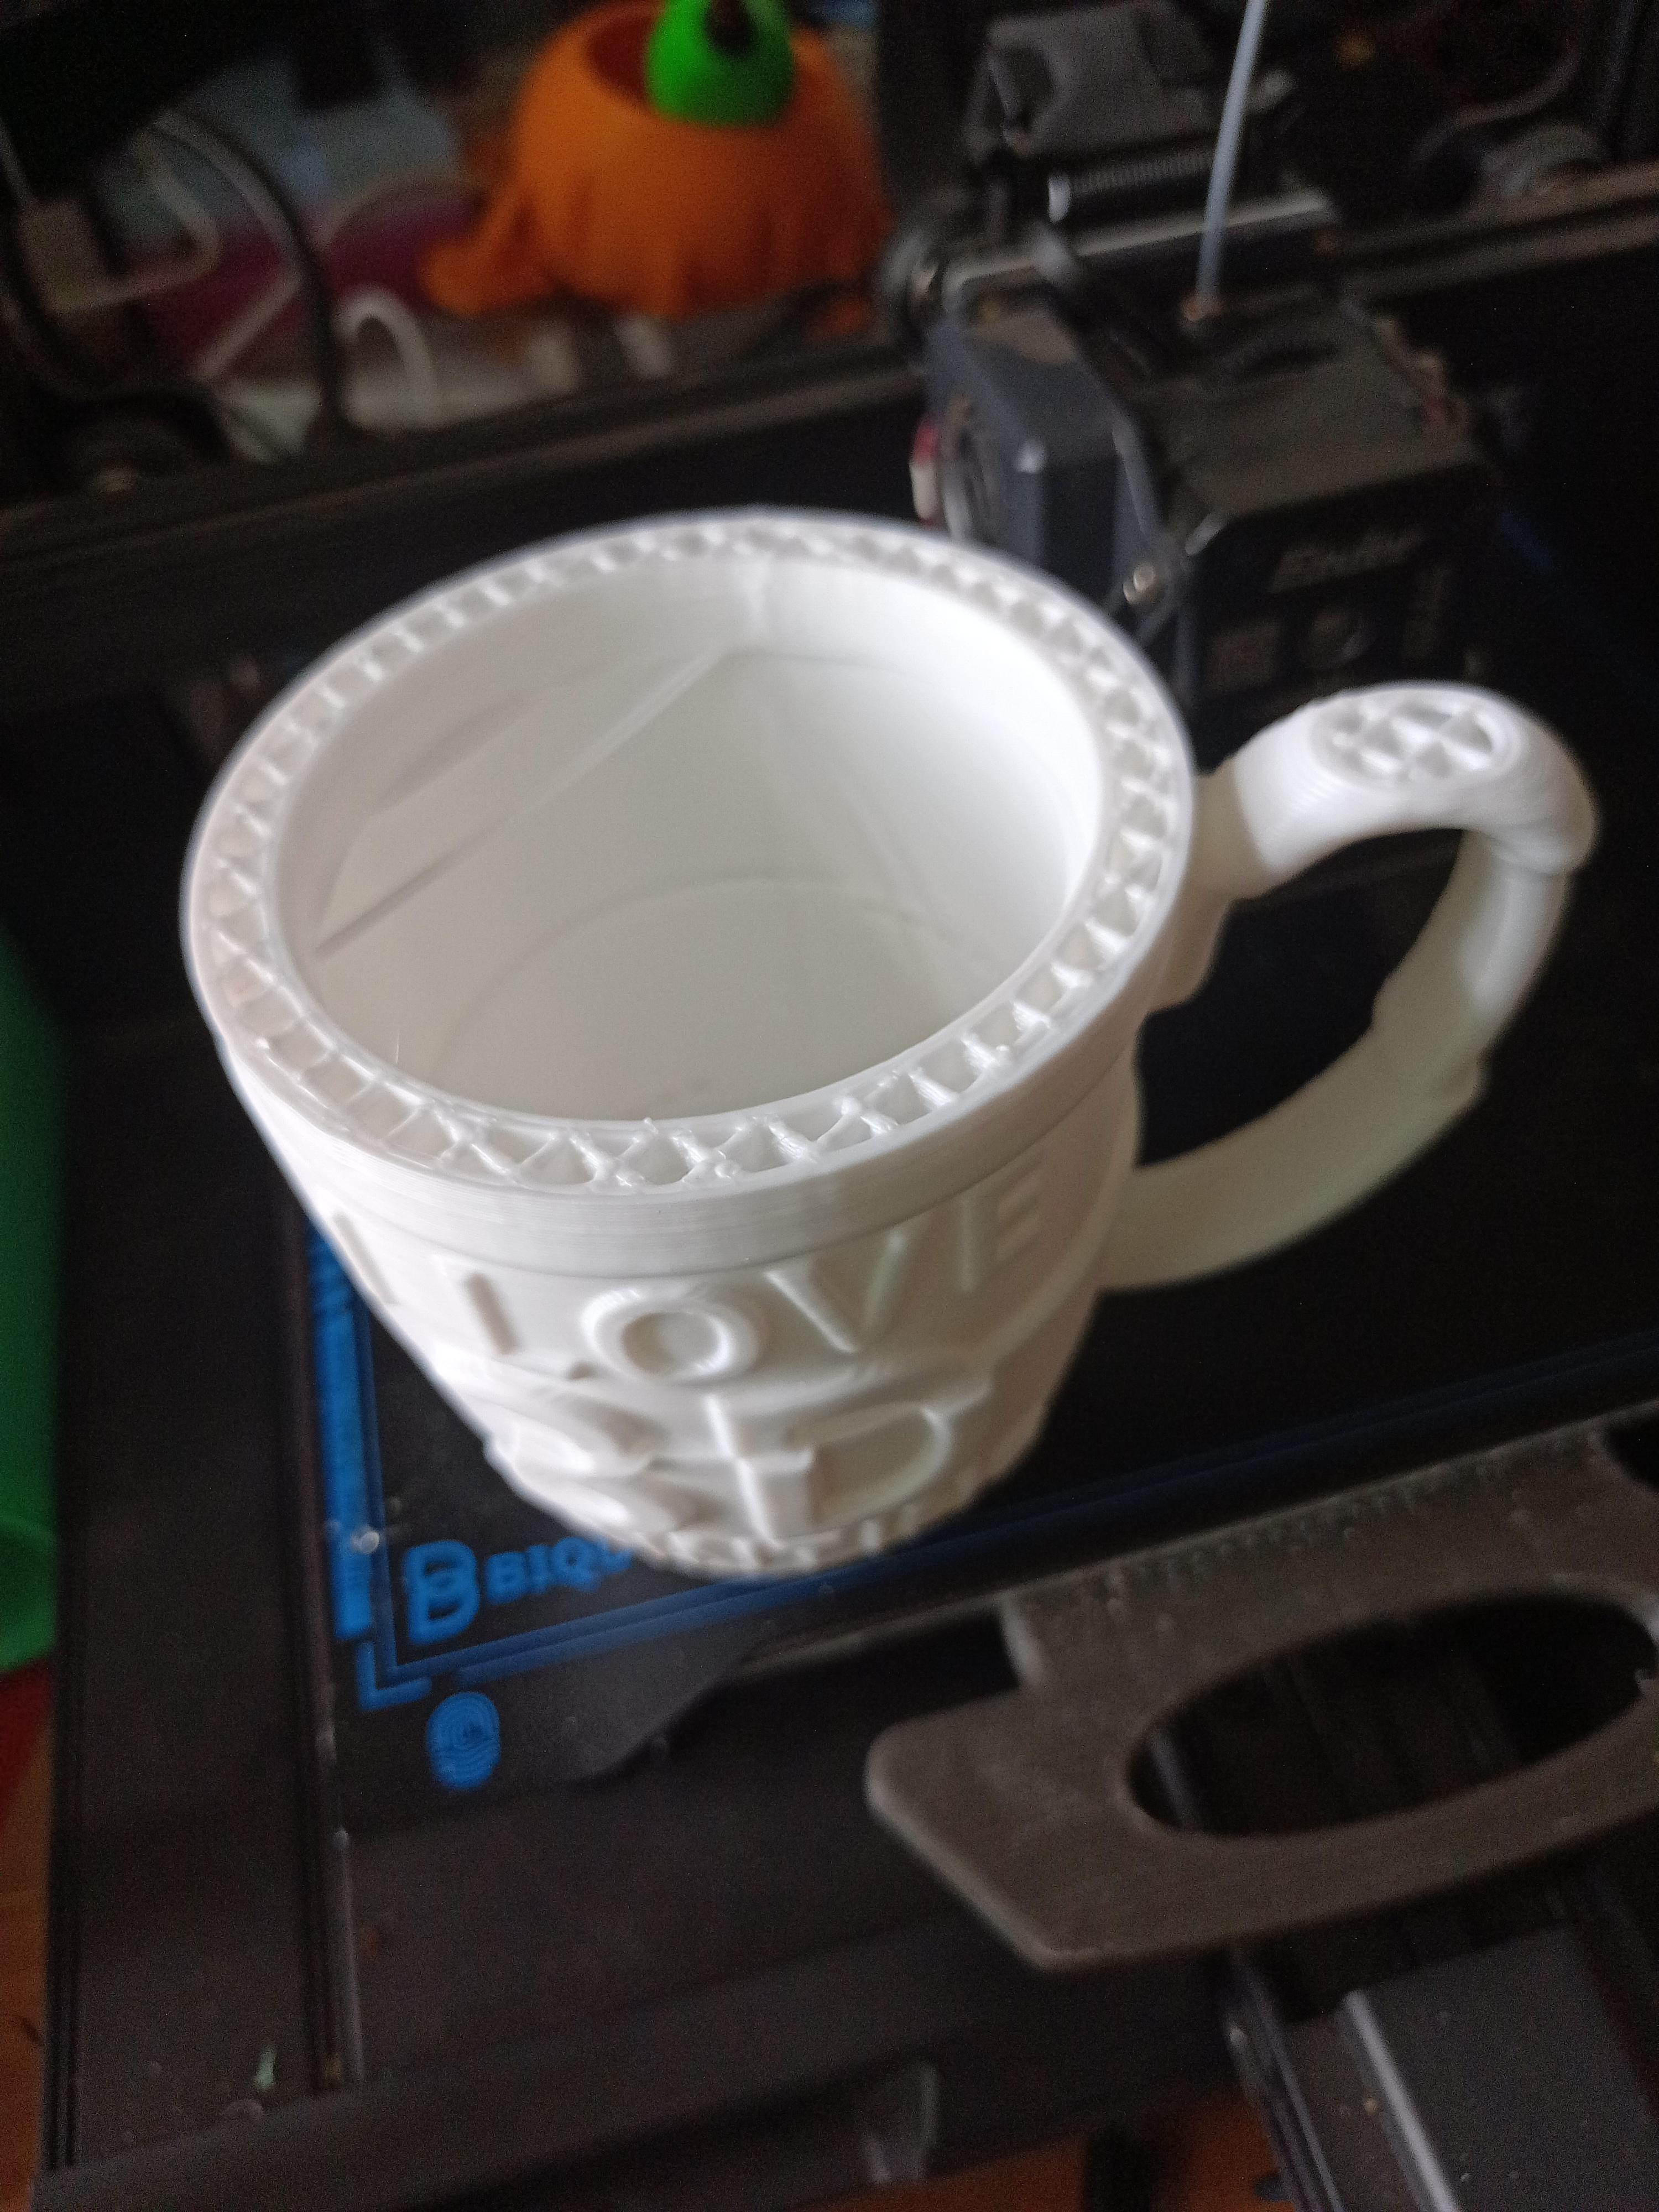 I Love 3D Printing Gag Gift Mug - 2nd attempt
Ender 3 S1, 0.4mm hardened nozzle
Layer height 0.4mm
No support  - 3d model